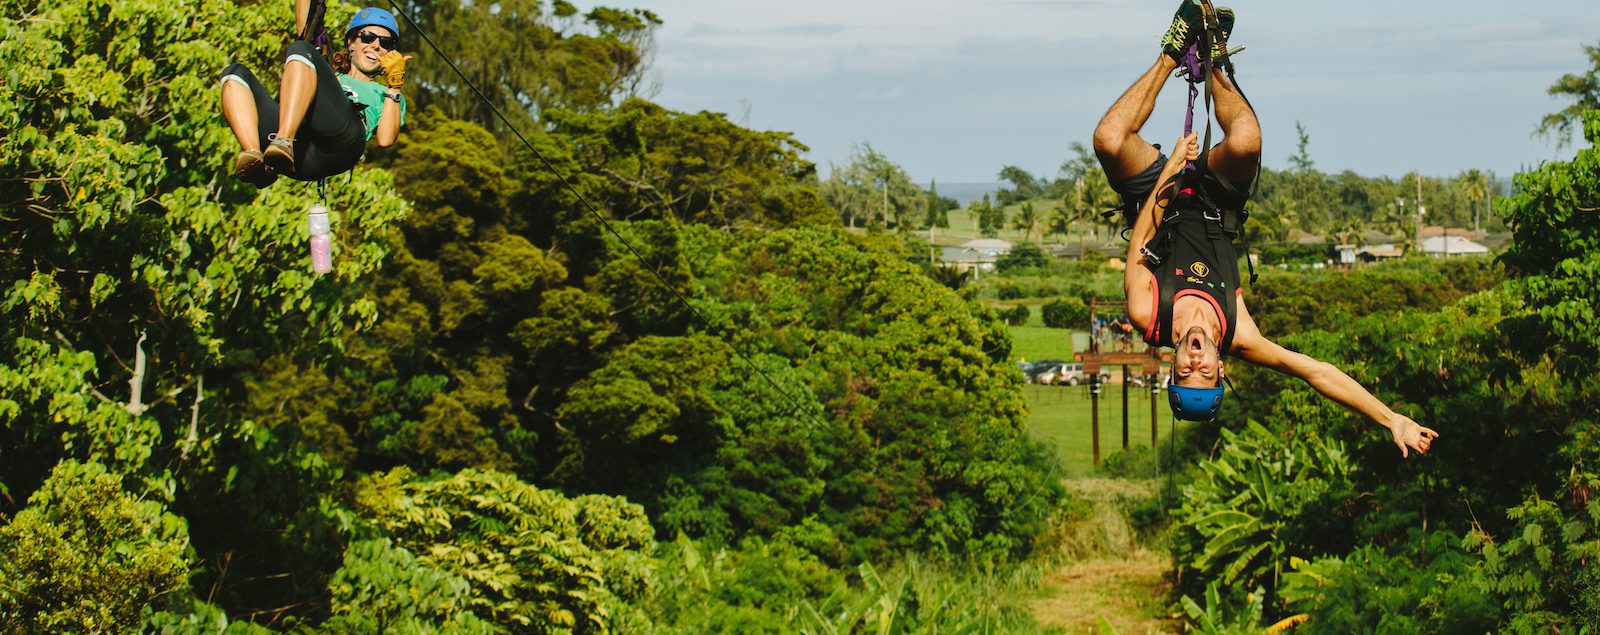 5 Reasons Our Zipline Tour in Oahu is Great for Families